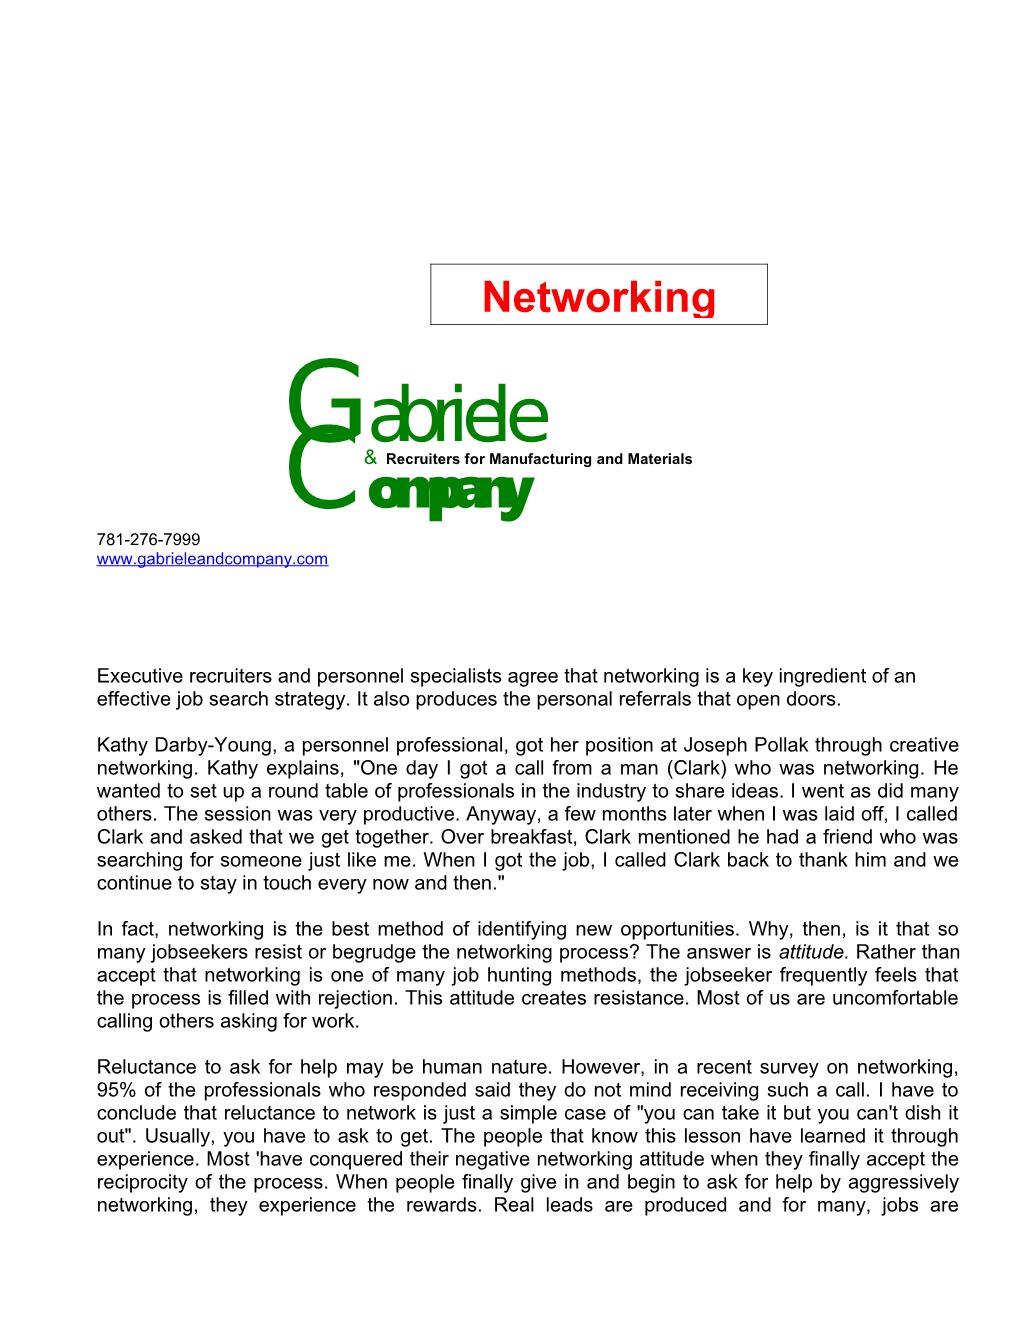 Executive Recruiters and Personnel Specialists Agree That Networking Is a Key Ingredient